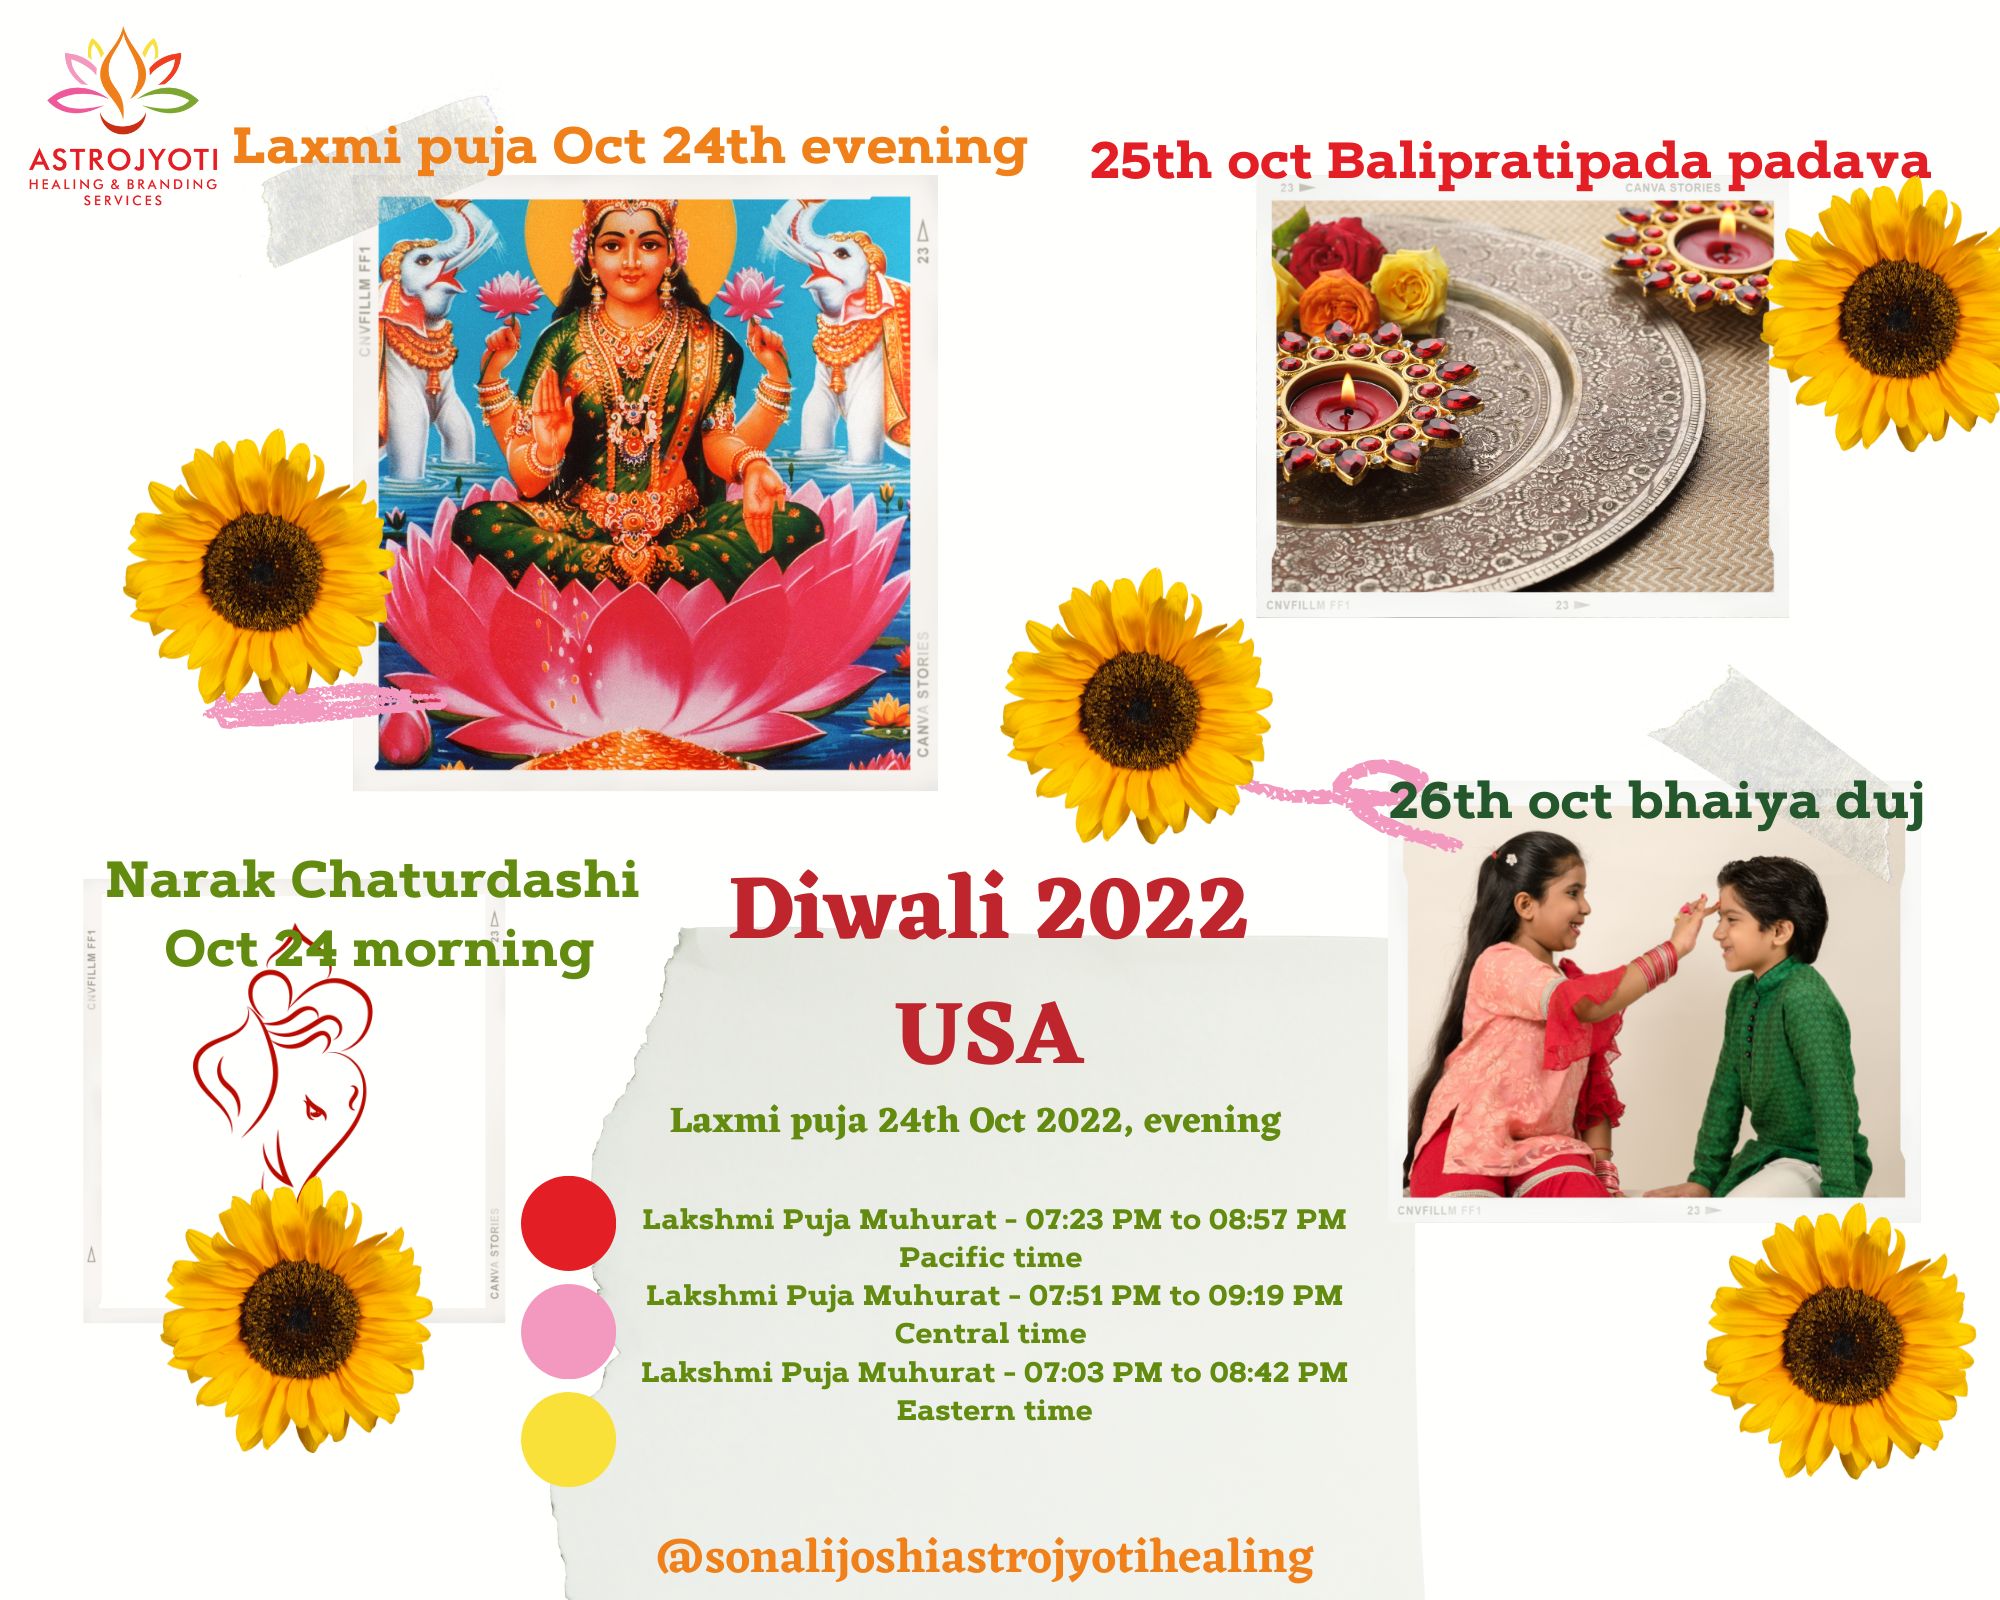 Diwali 2022 USA Dates and Times — Astrojyoti Healing and Branding Services